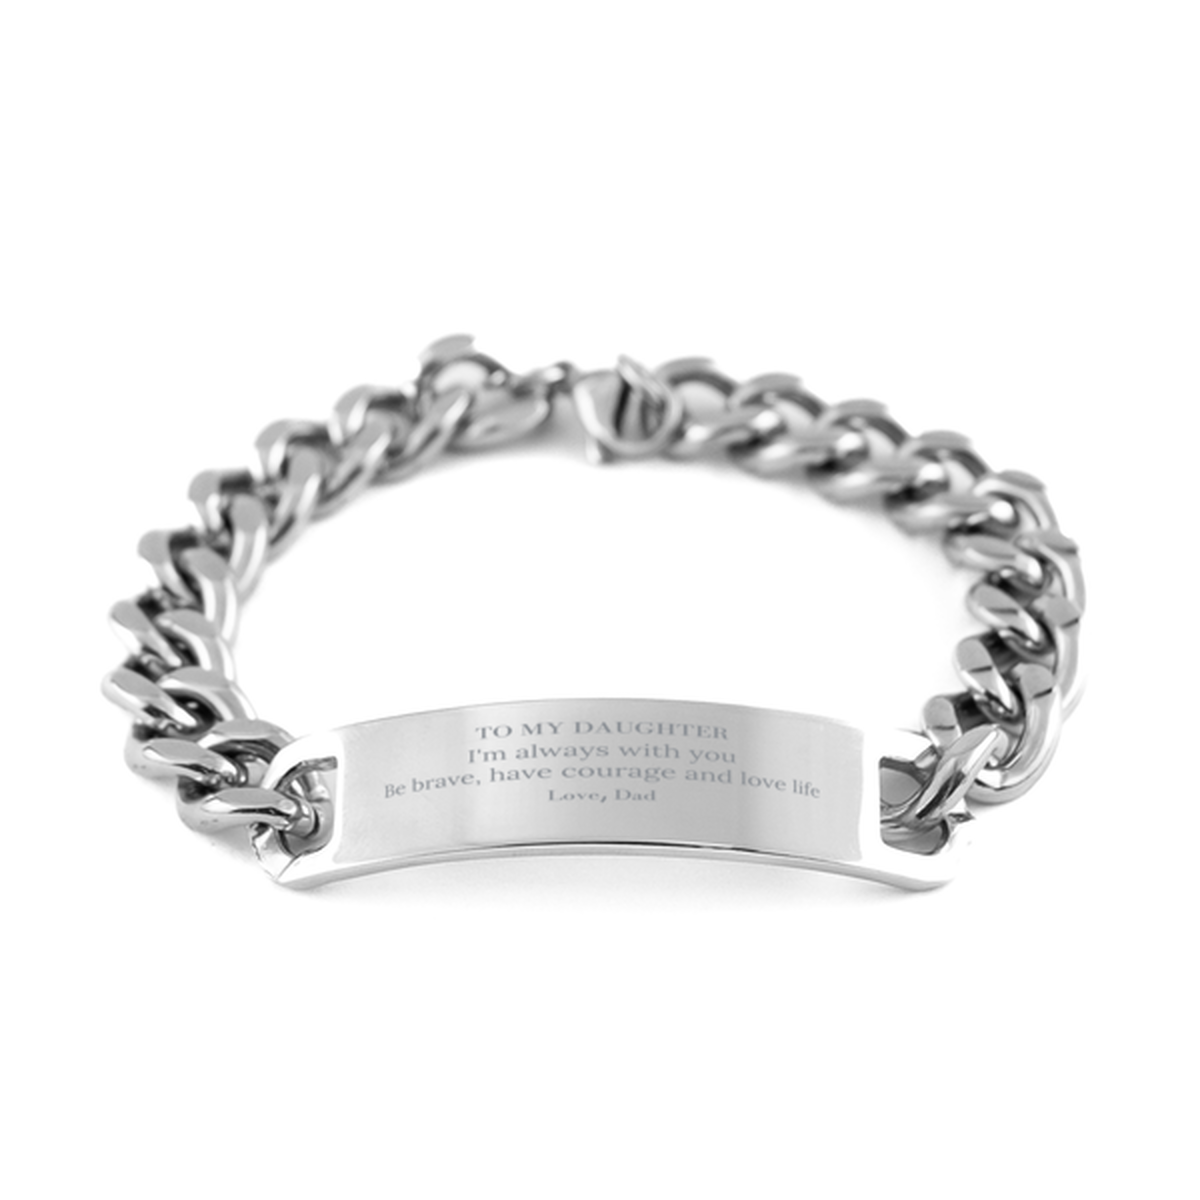 To My Daughter Gifts from Dad, Unique Cuban Chain Stainless Steel Bracelet Inspirational Christmas Birthday Graduation Gifts for Daughter I'm always with you. Be brave, have courage and love life. Love, Dad